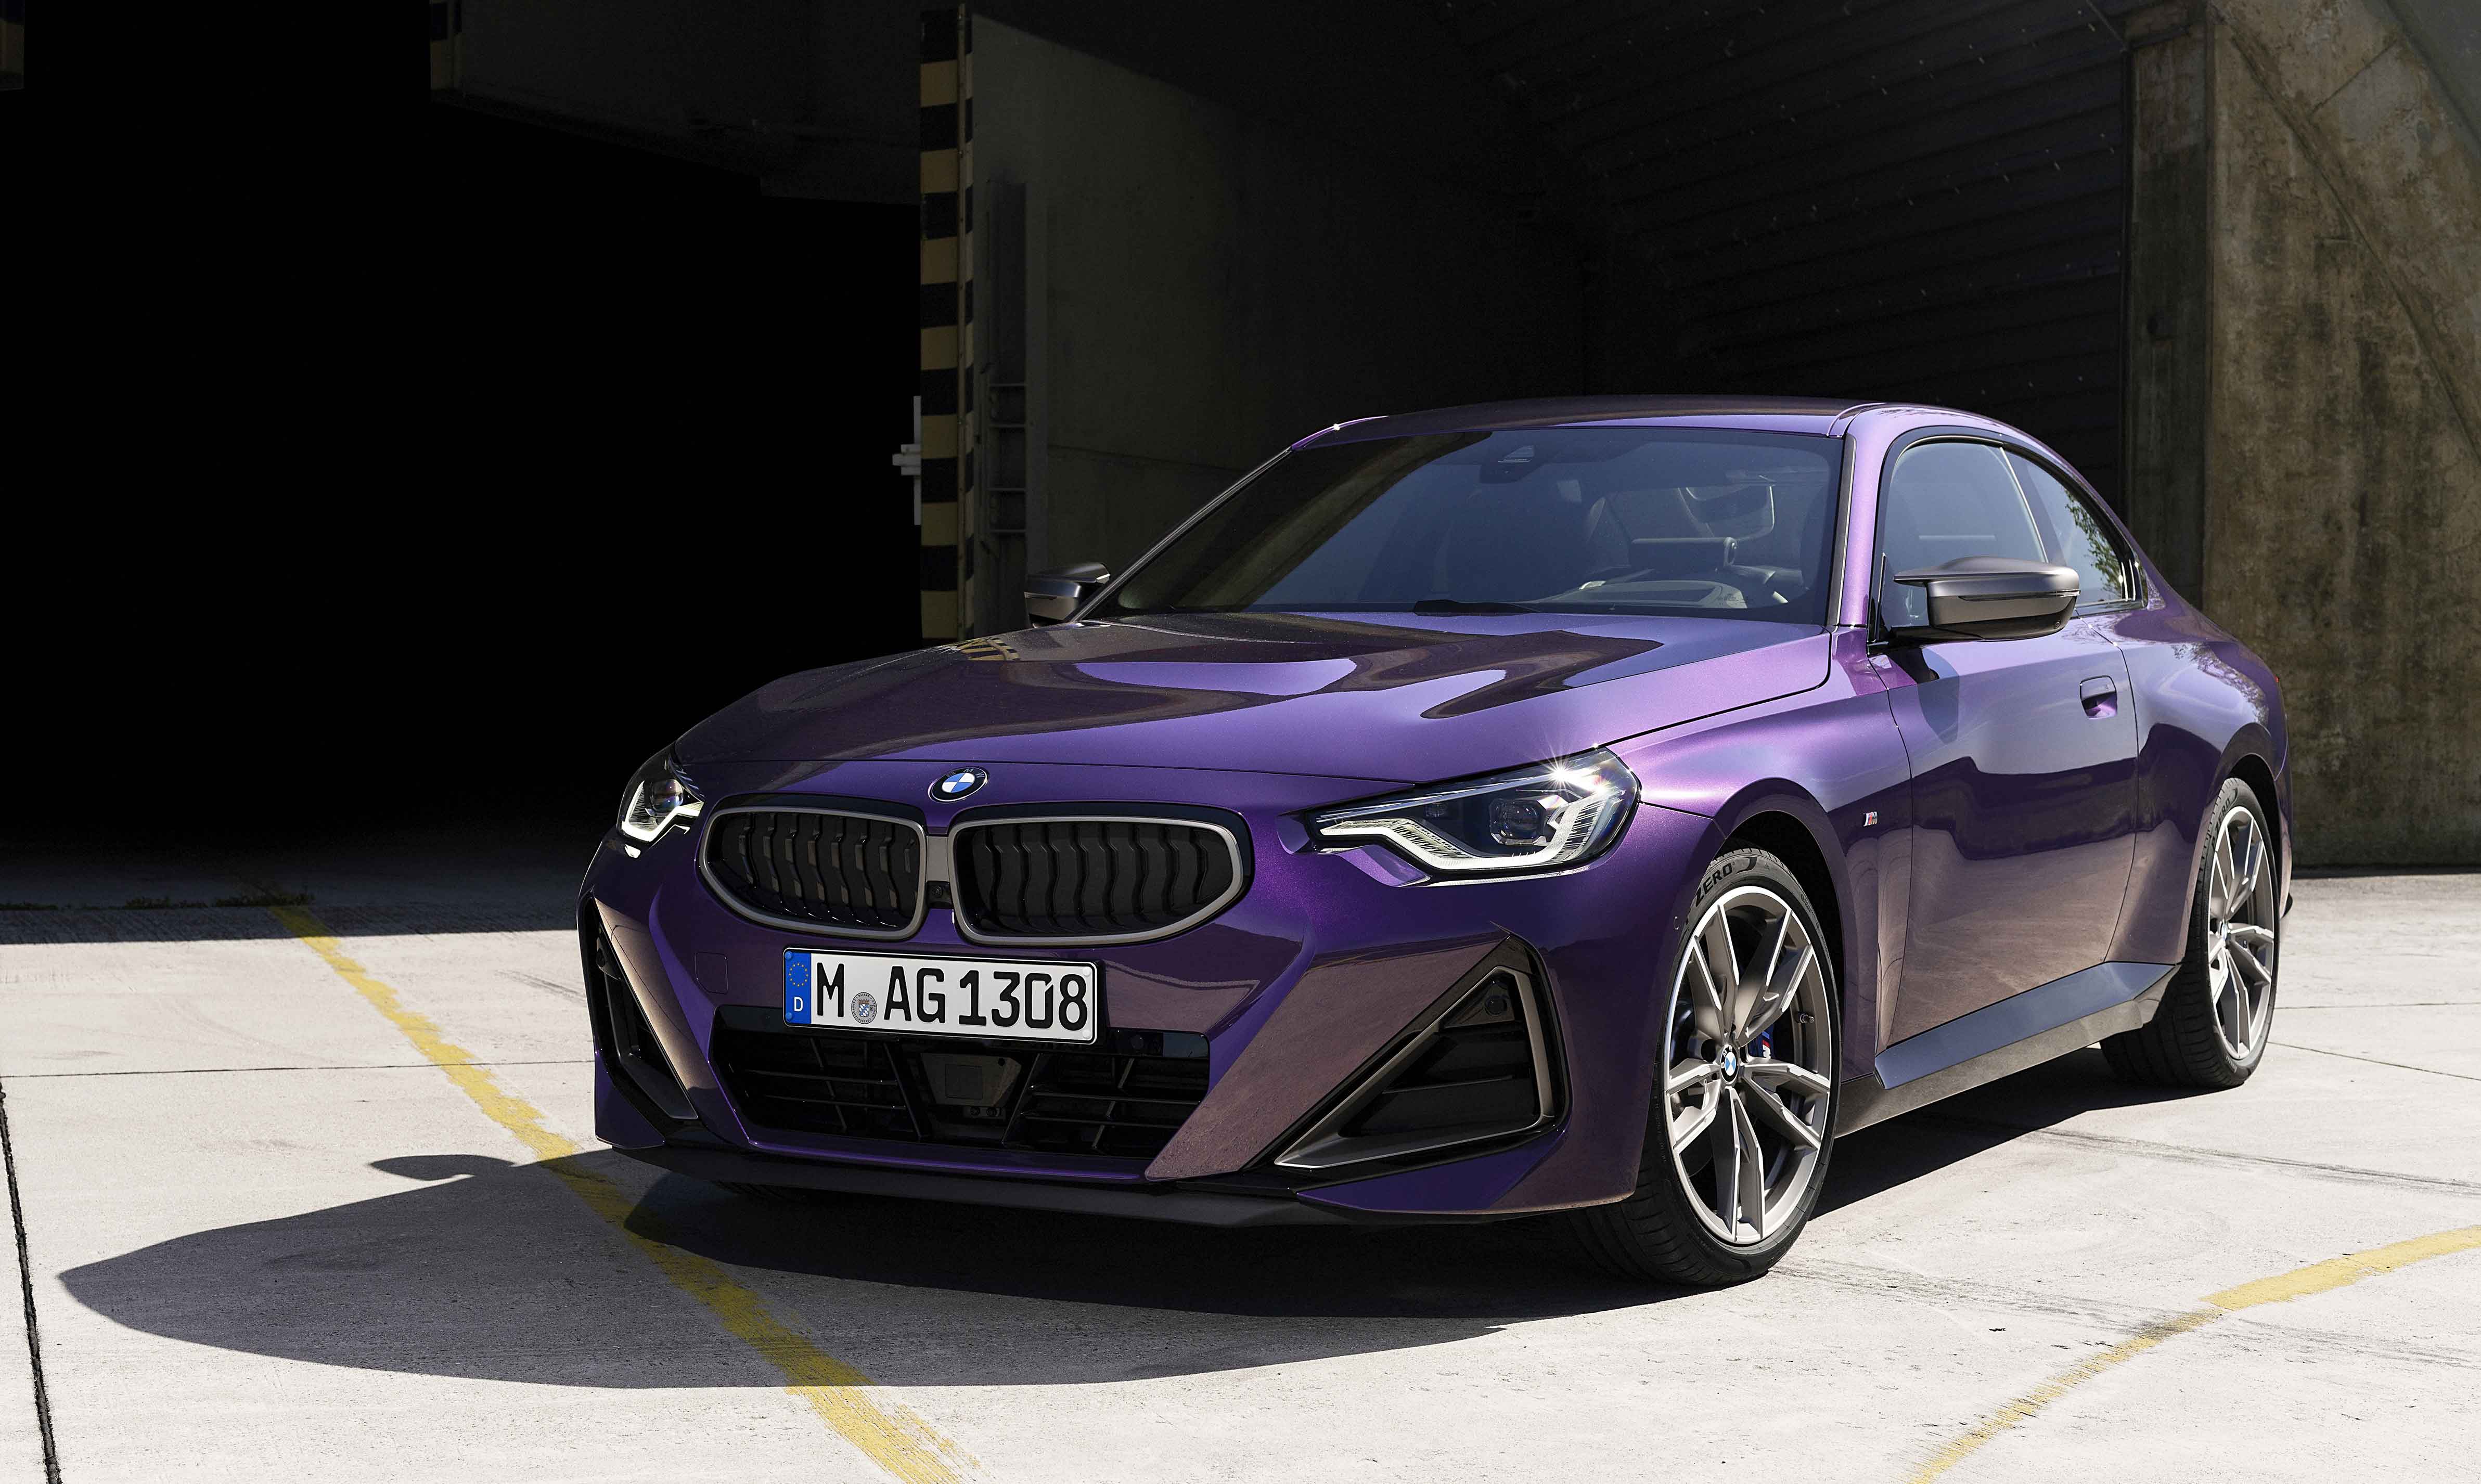 The all-new BMW 2 Series Coupé